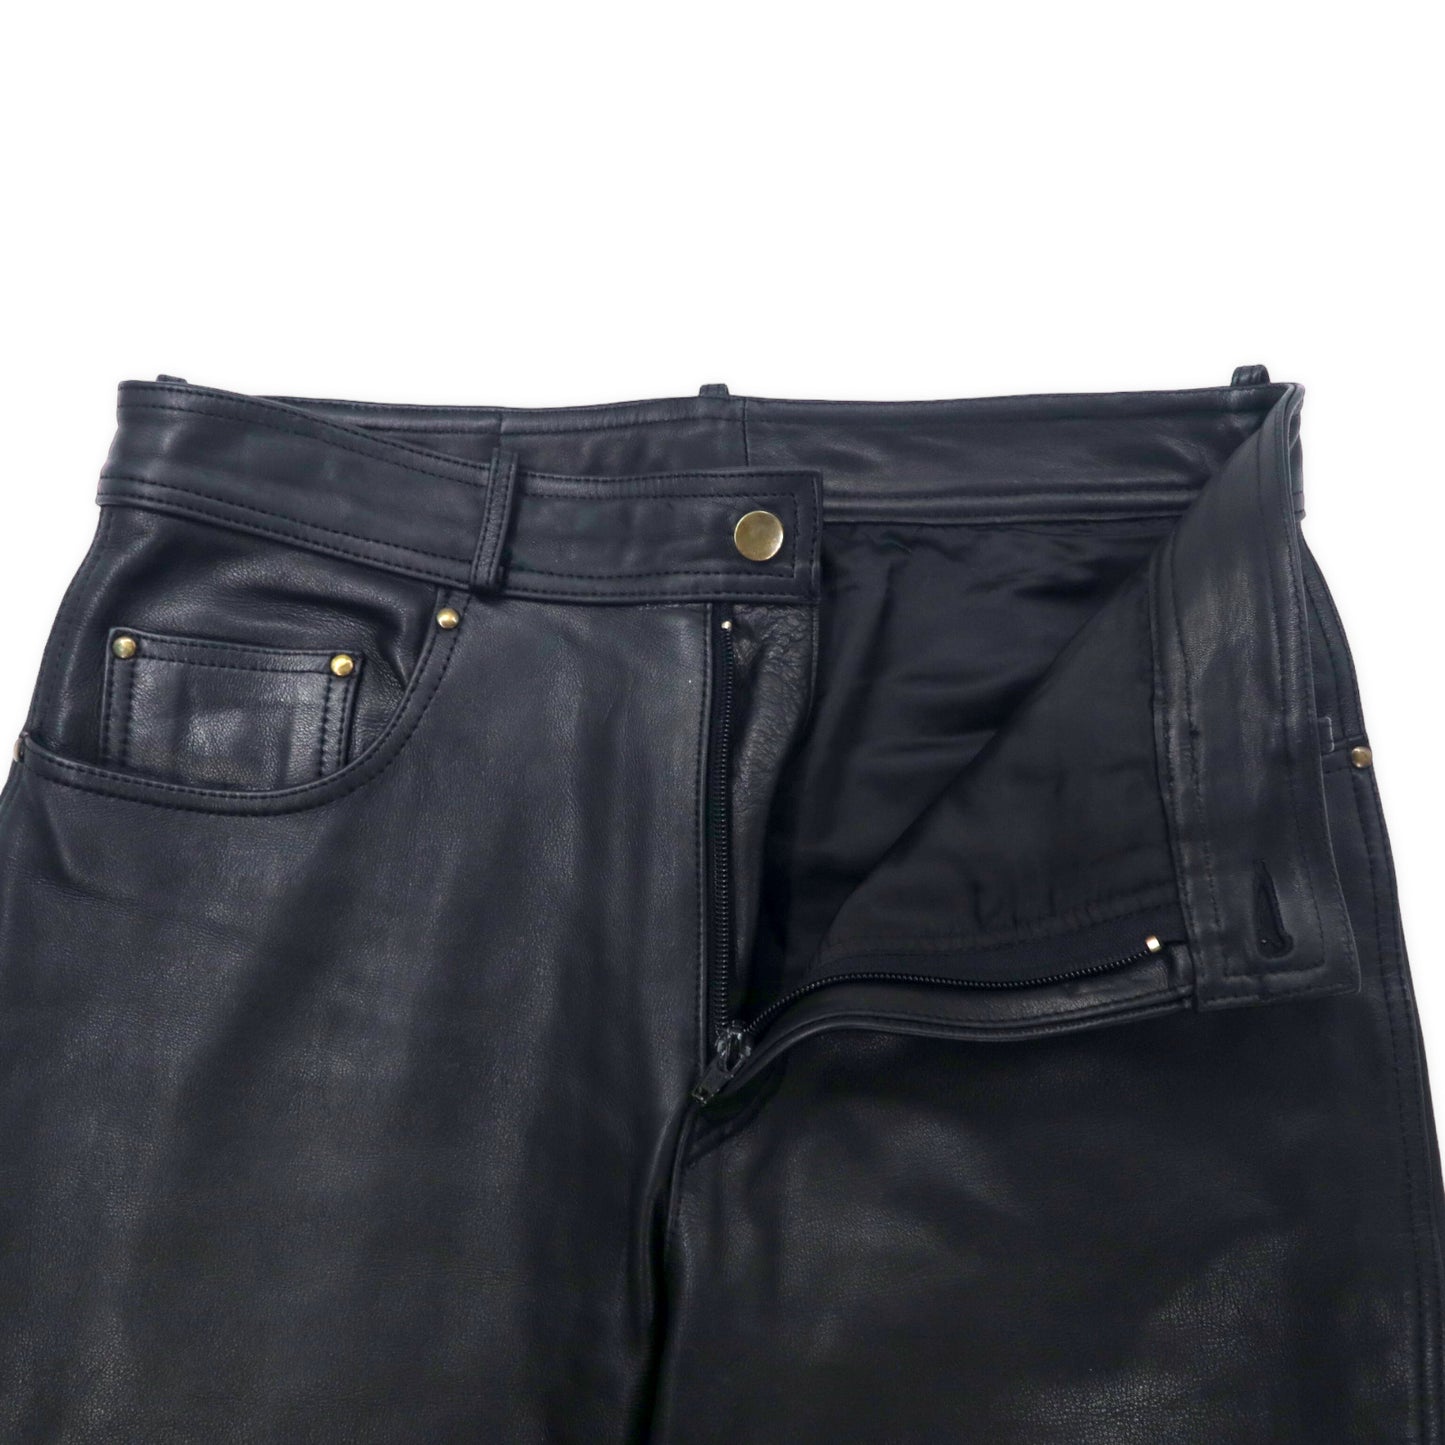 AGORA leather PANTS 31 Black Cowhide Zipper Fly 5 Pocket – 日本然